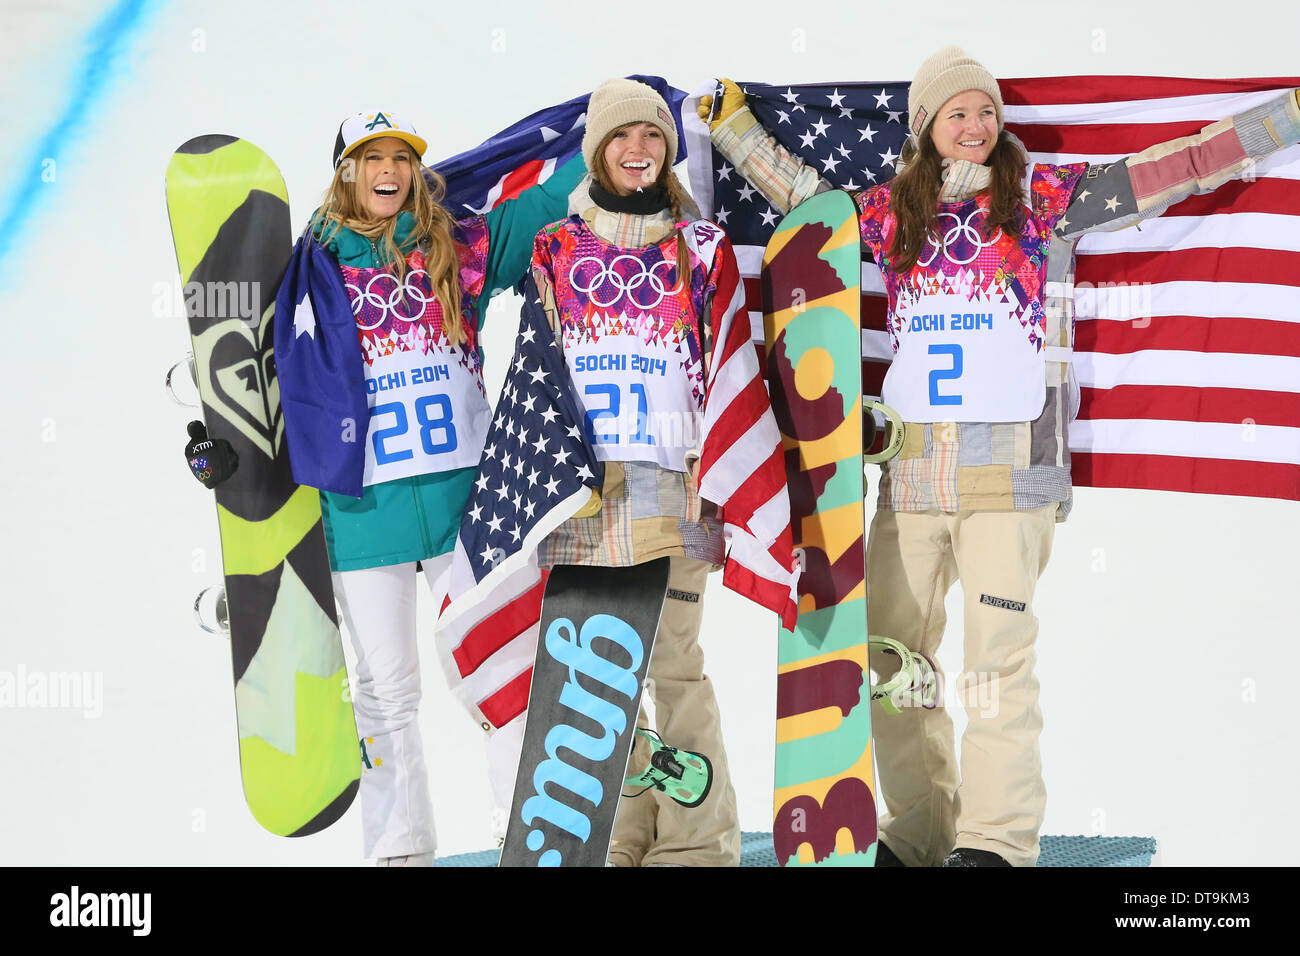 Torah Bright (AUS) celebrates with Kaitlyn Farrington (USA) and Kelly Clark (USA) at the flower ceremony for the women's halfpipe at the Sochi 2014 Winter Olympic Games. Australian Bright won the silver medal with Americans Farrington taking gold and Clark bronze. (Photo Yutaka/AFLO) medallist Kelly Clark (left) and gold medallist Kaitlyn Farrington, both from the US. Stock Photo